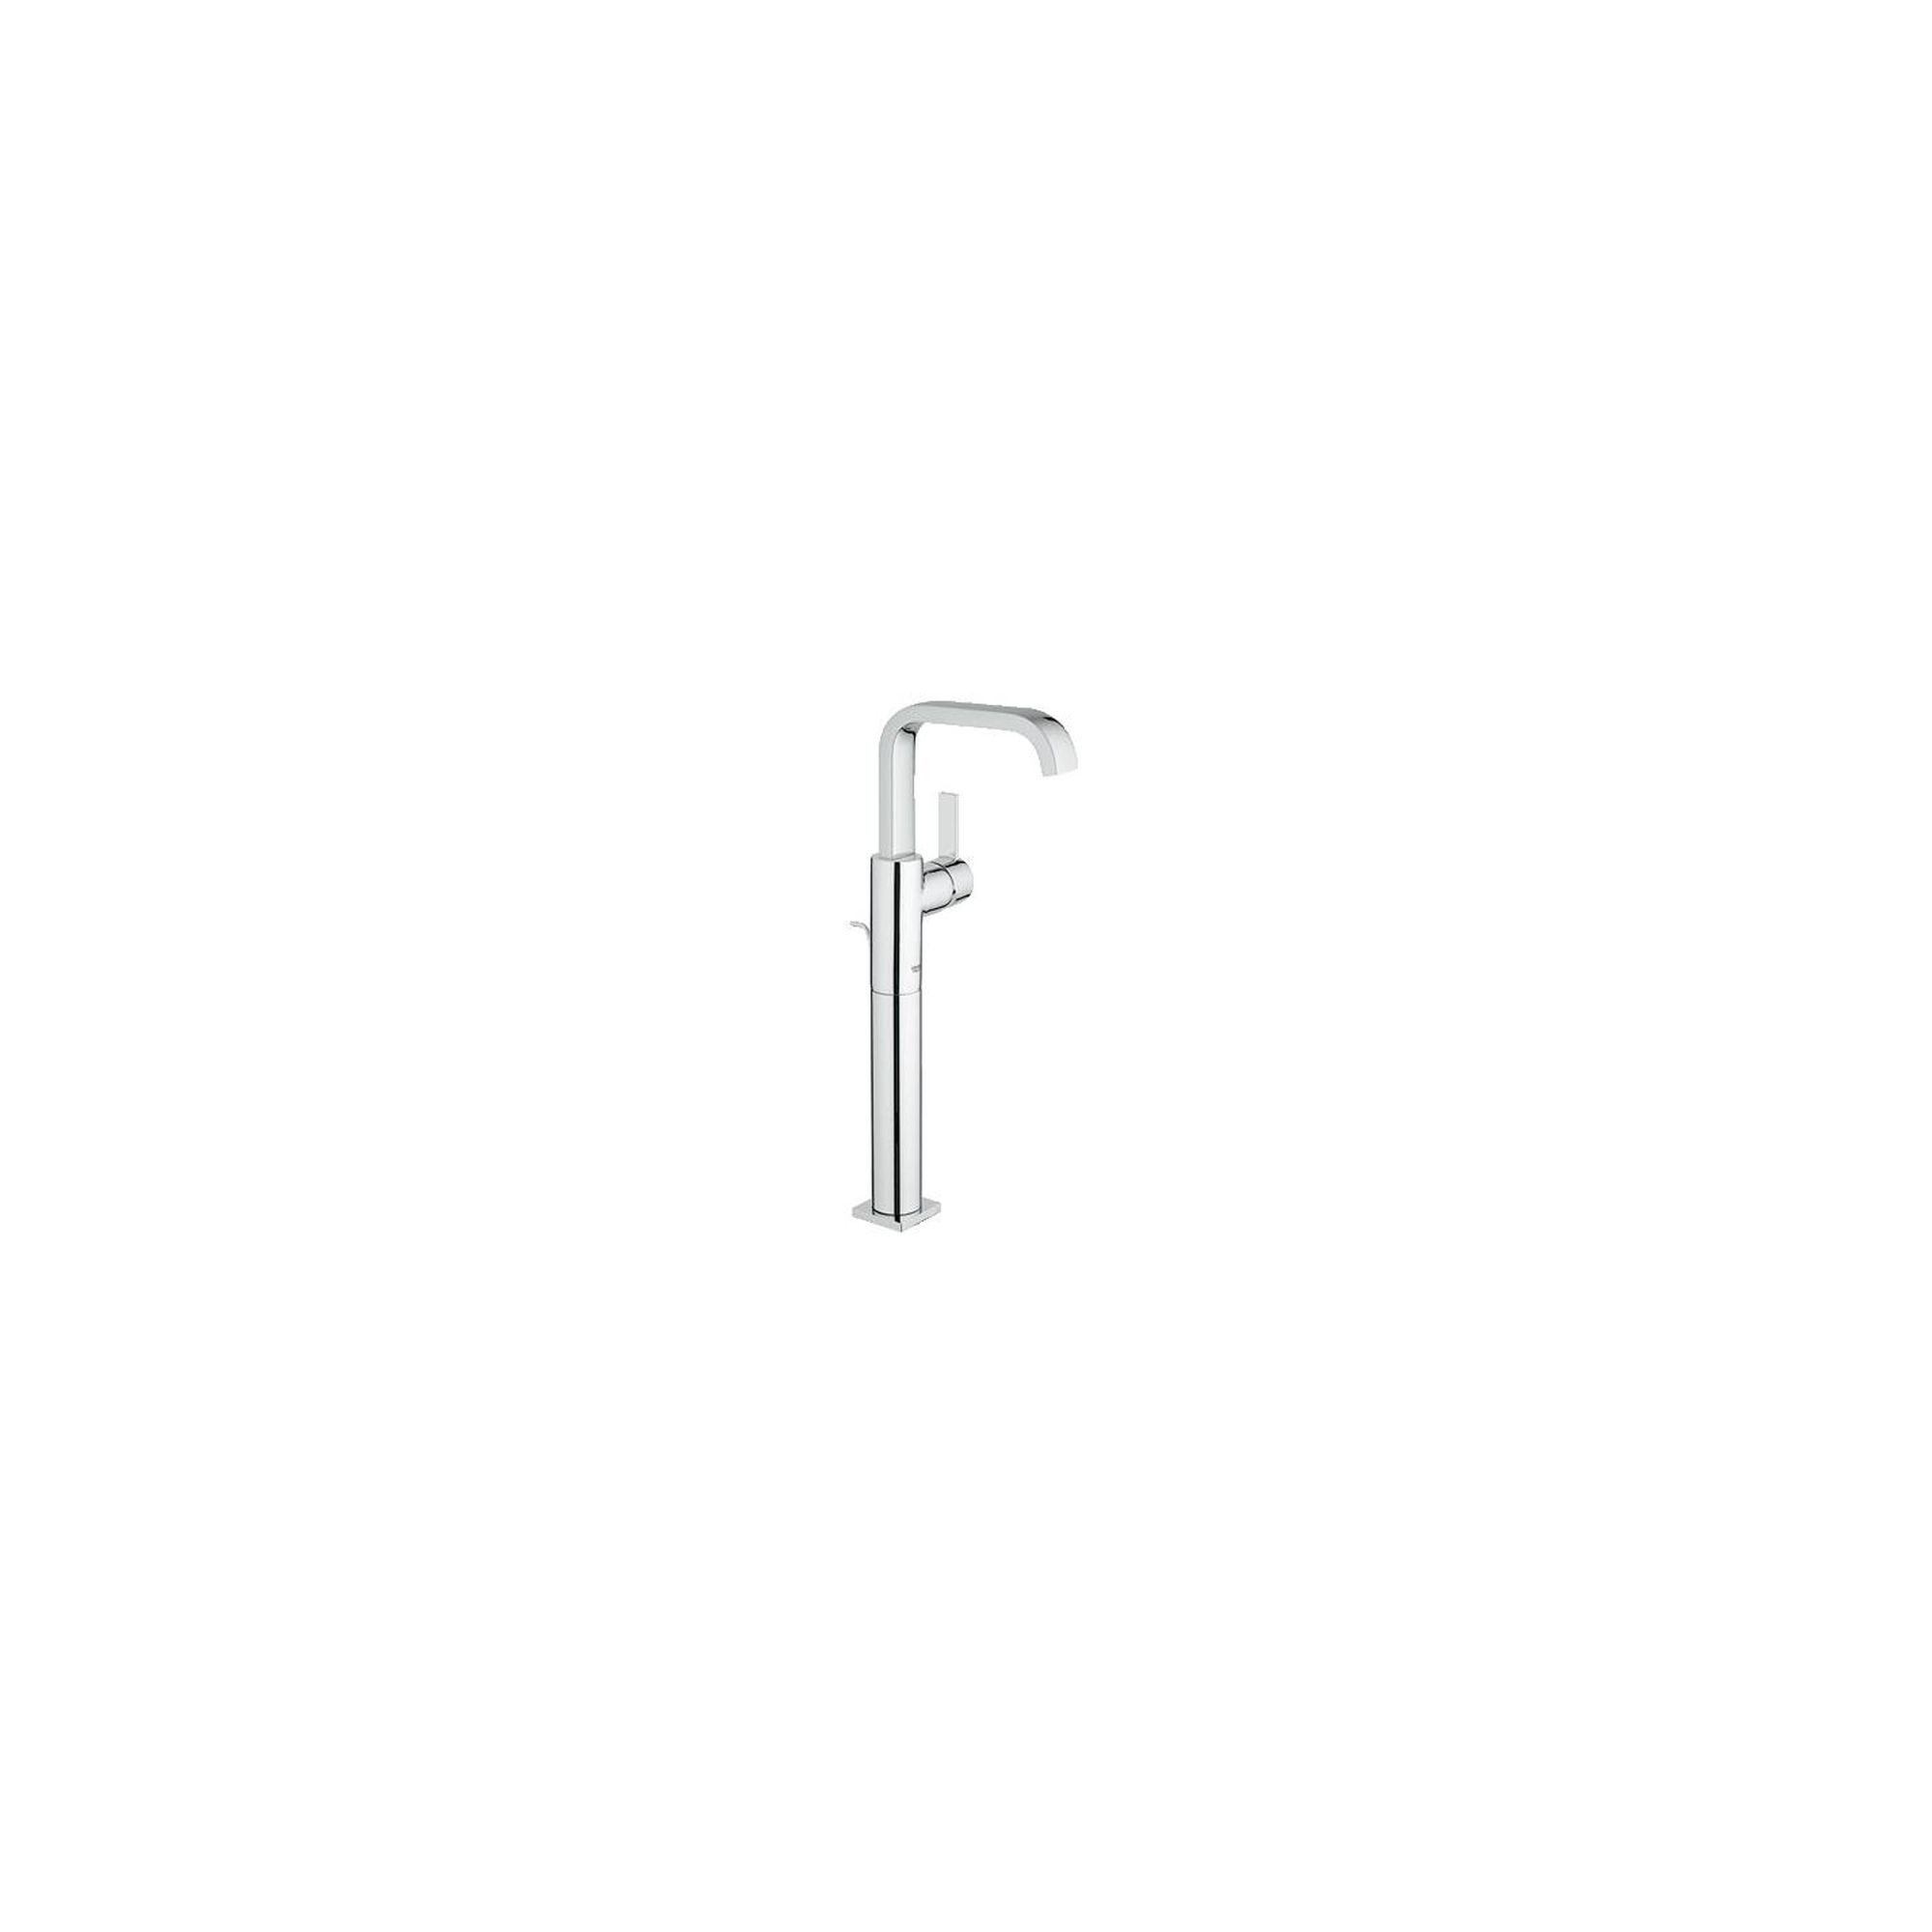 Grohe Allure Side Action Mono Basin Mixer Tap, Floor Standing, Chrome at Tescos Direct